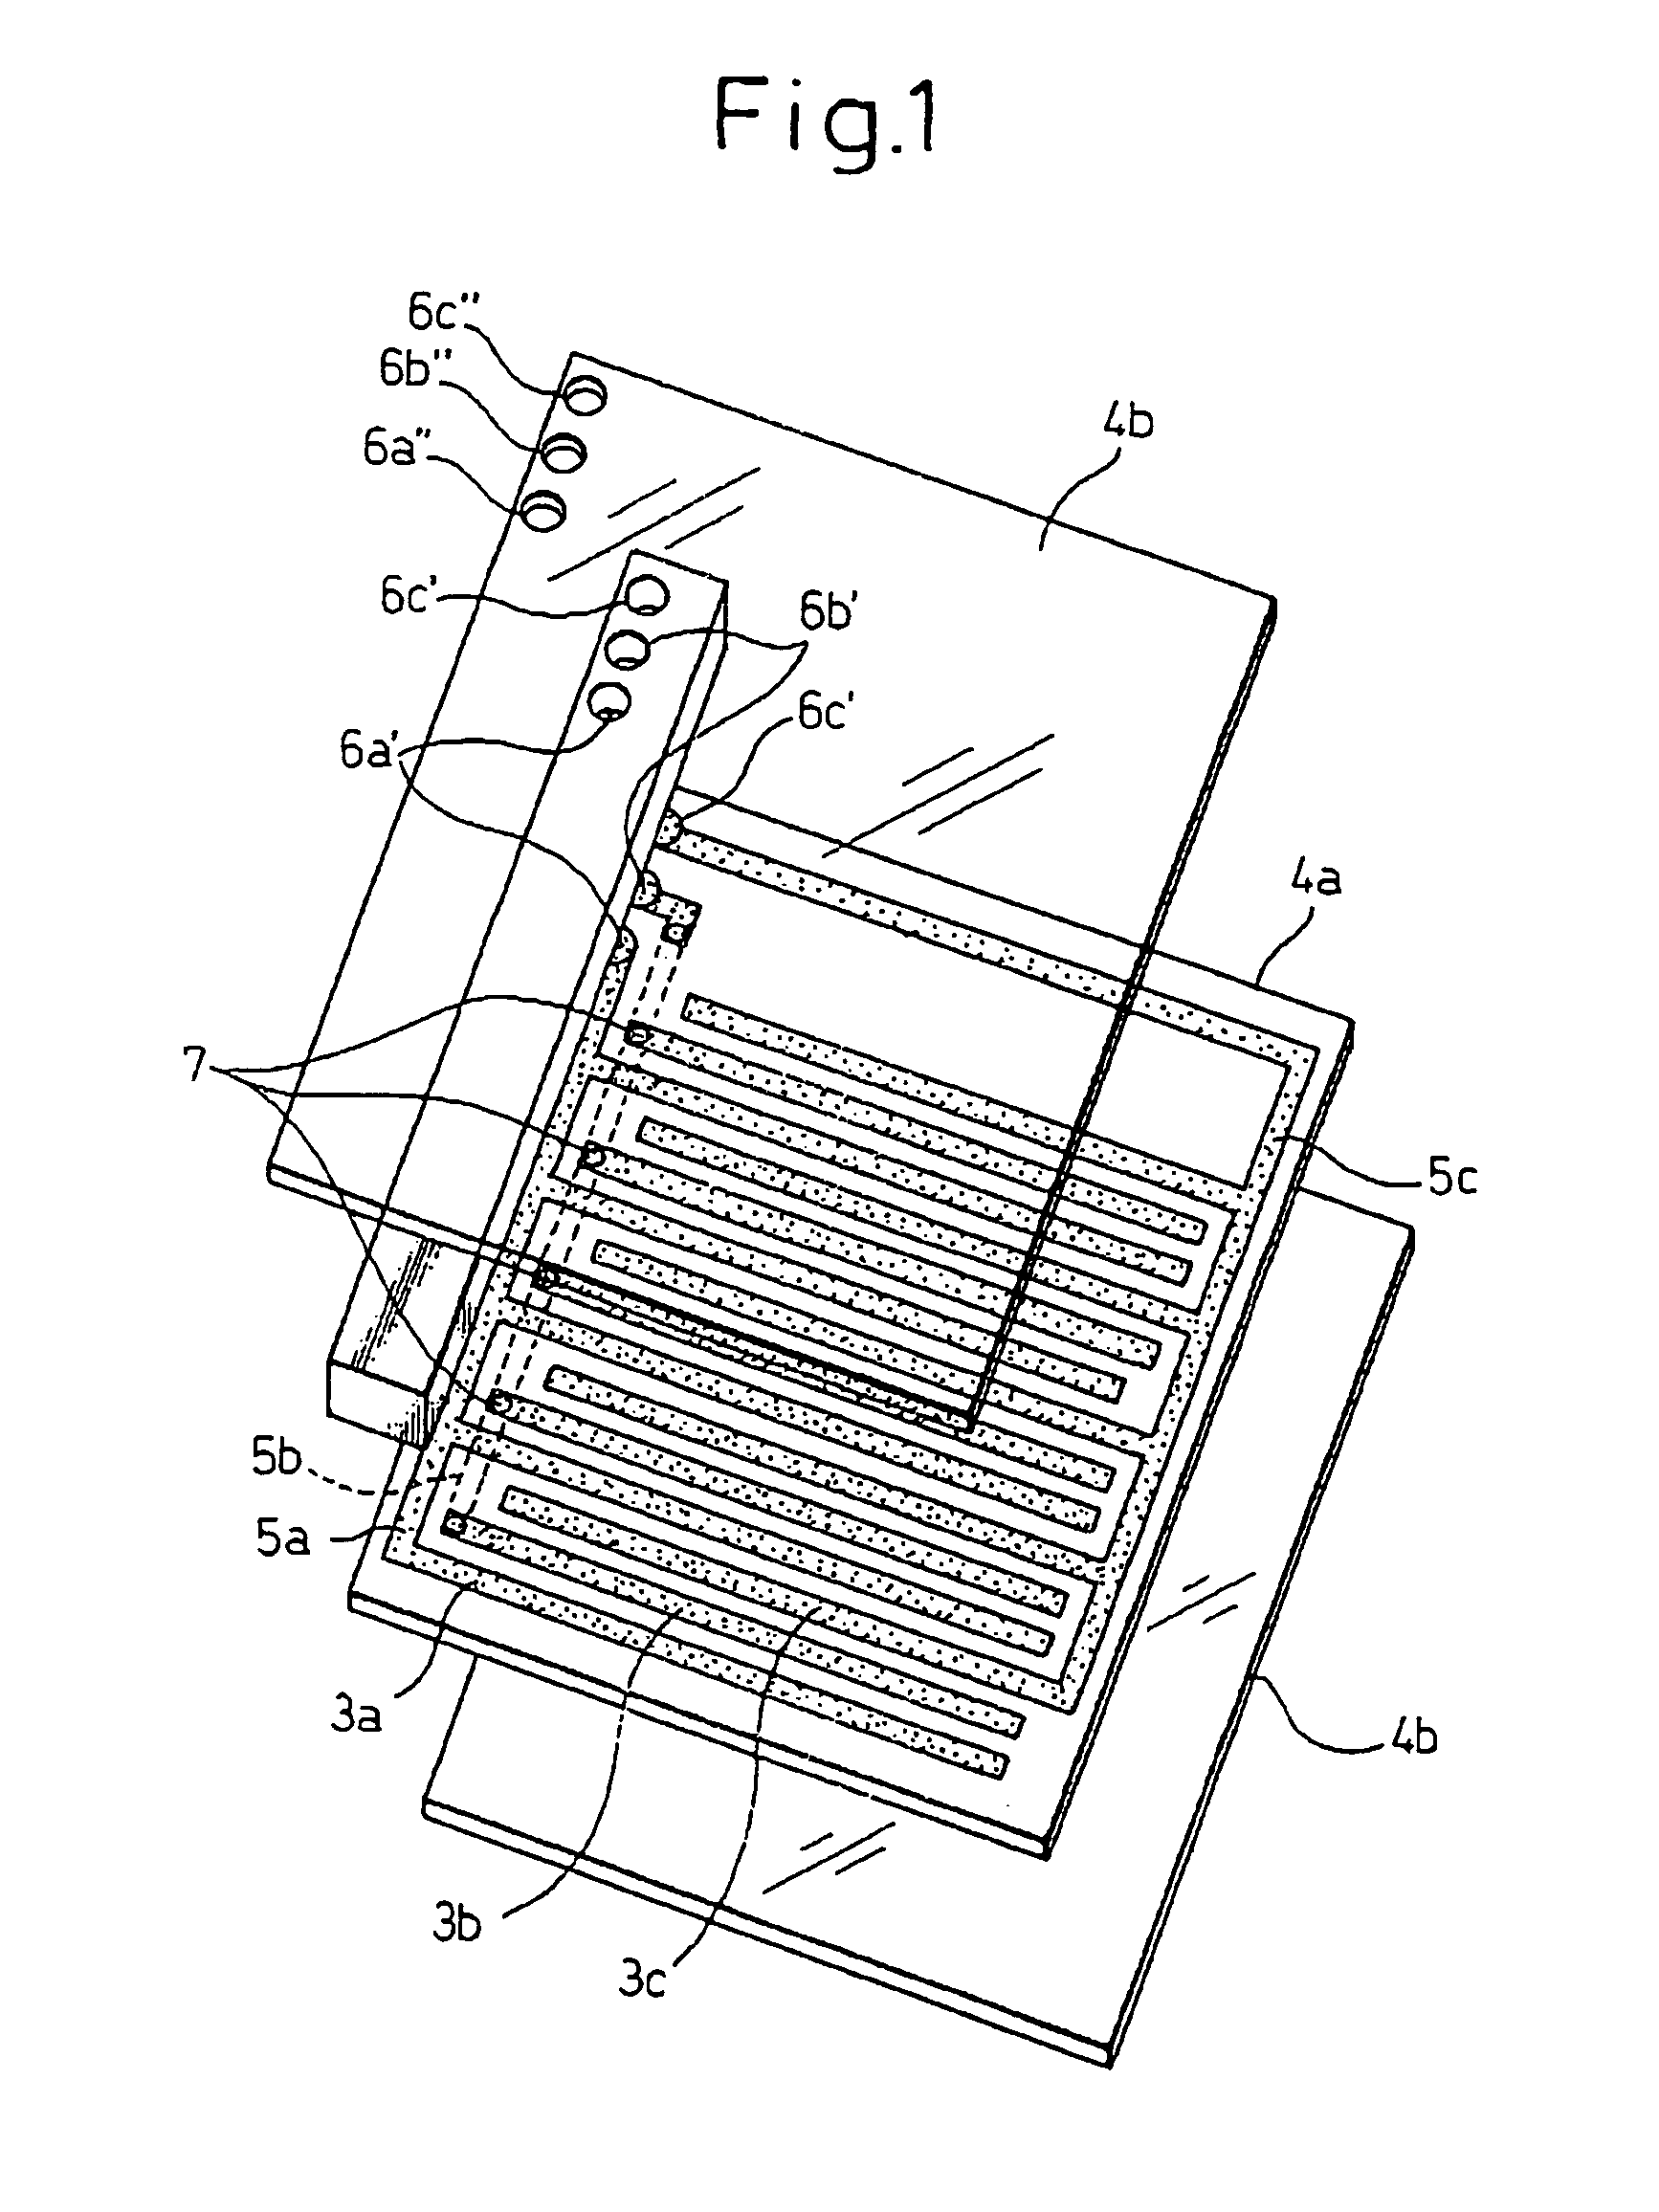 Electrostatic motor utilizing static electricity as a drive force